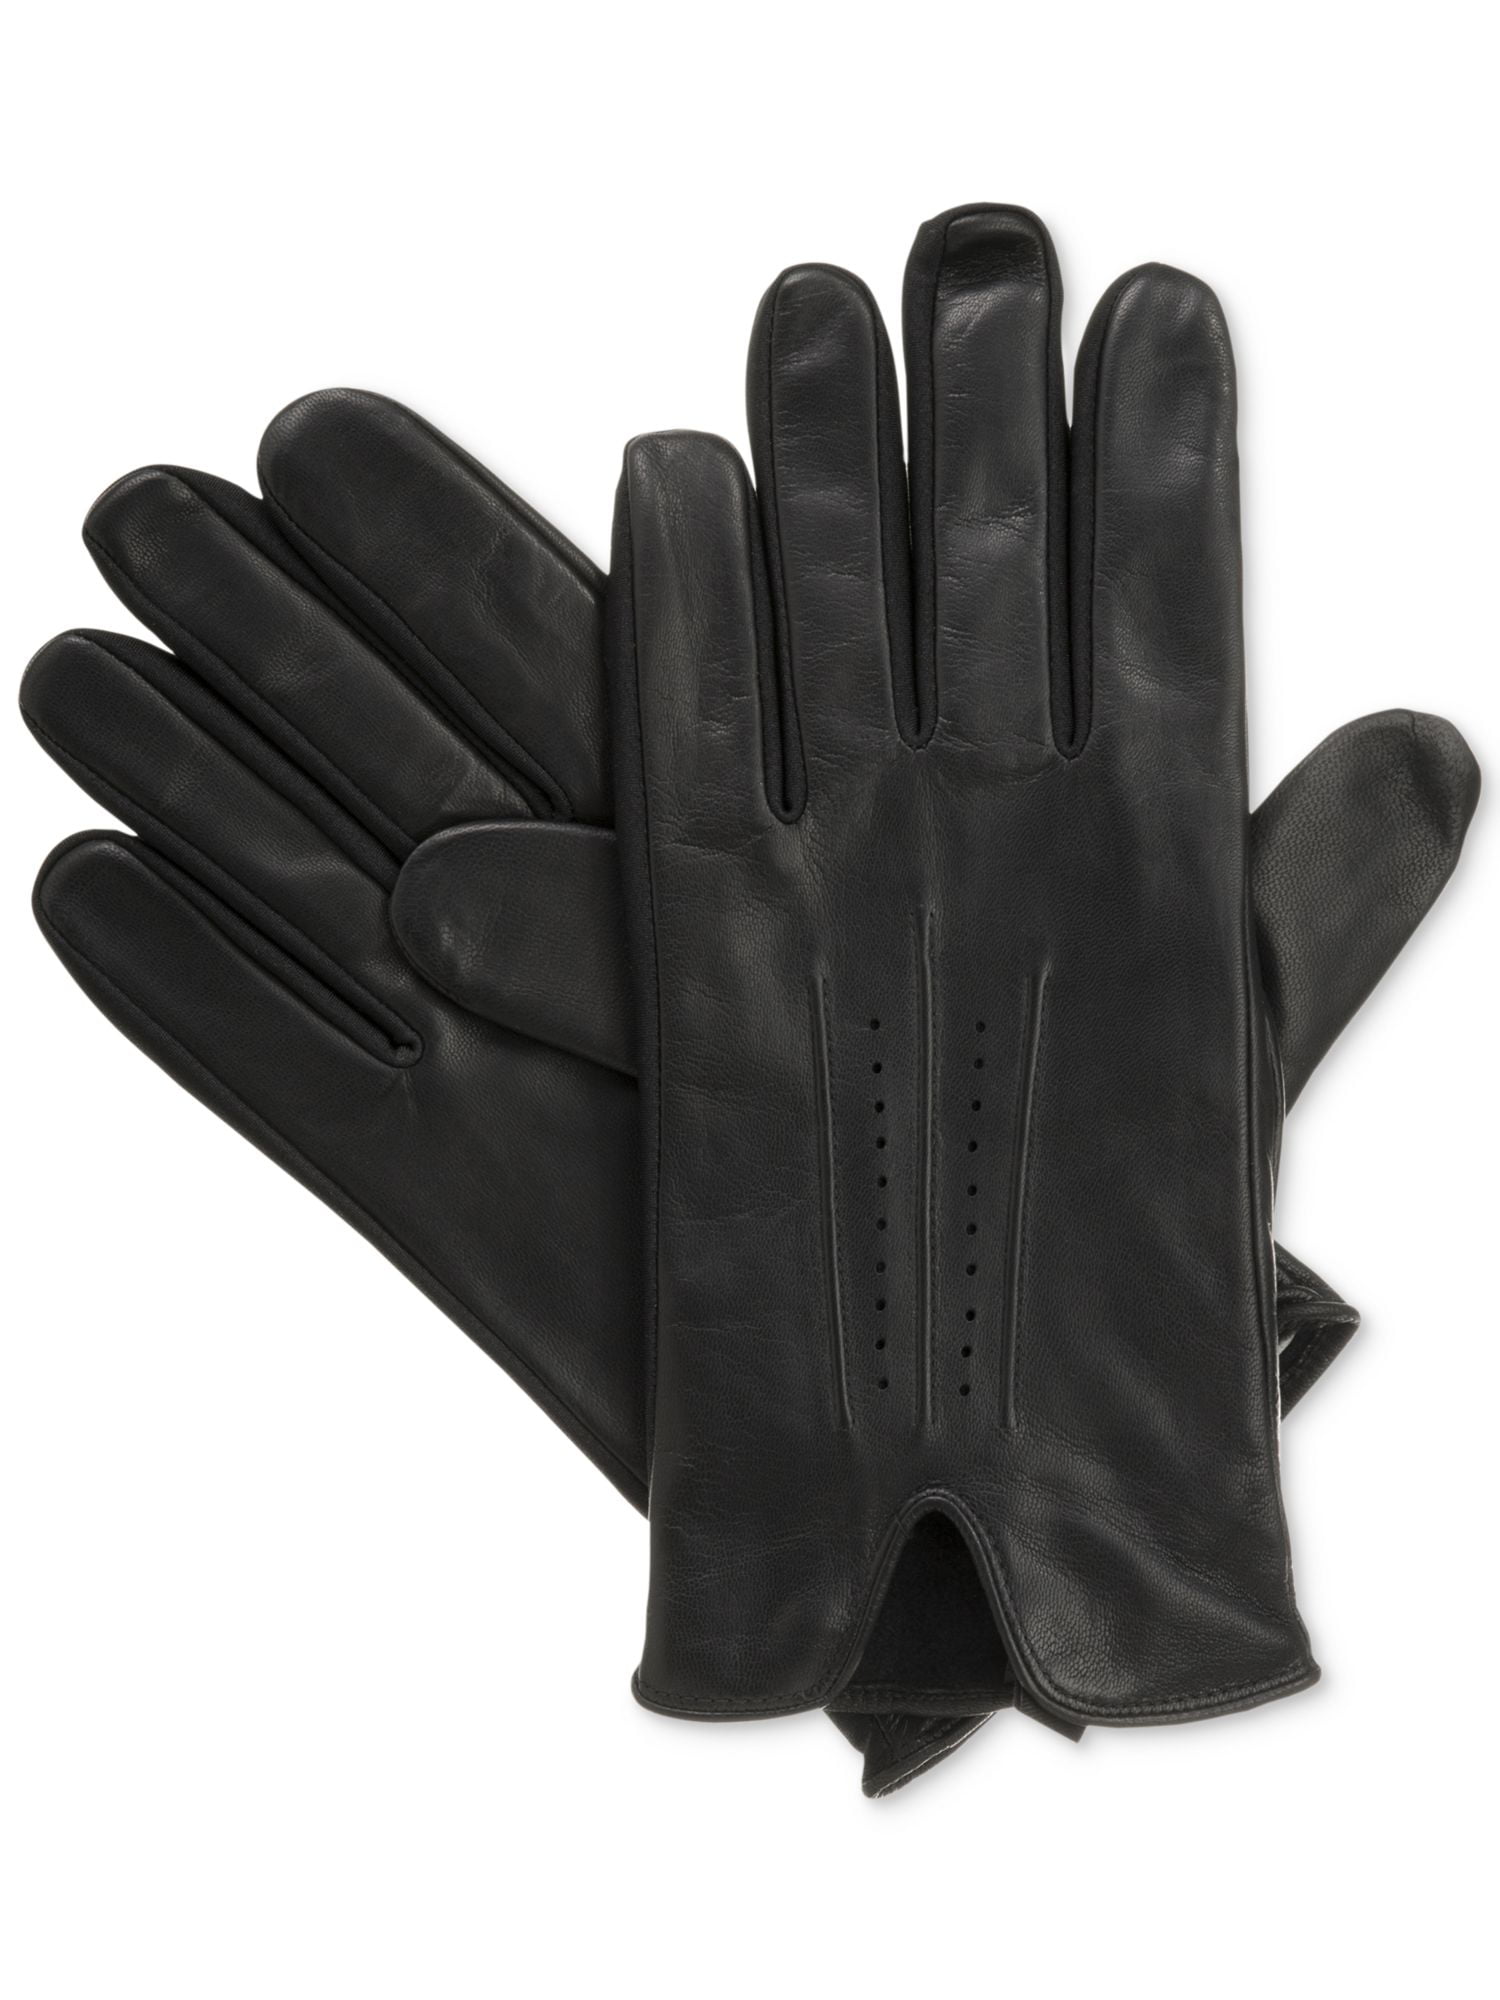 Dockers Mens Black Genuine Leather Gloves Micro Terry Lined 